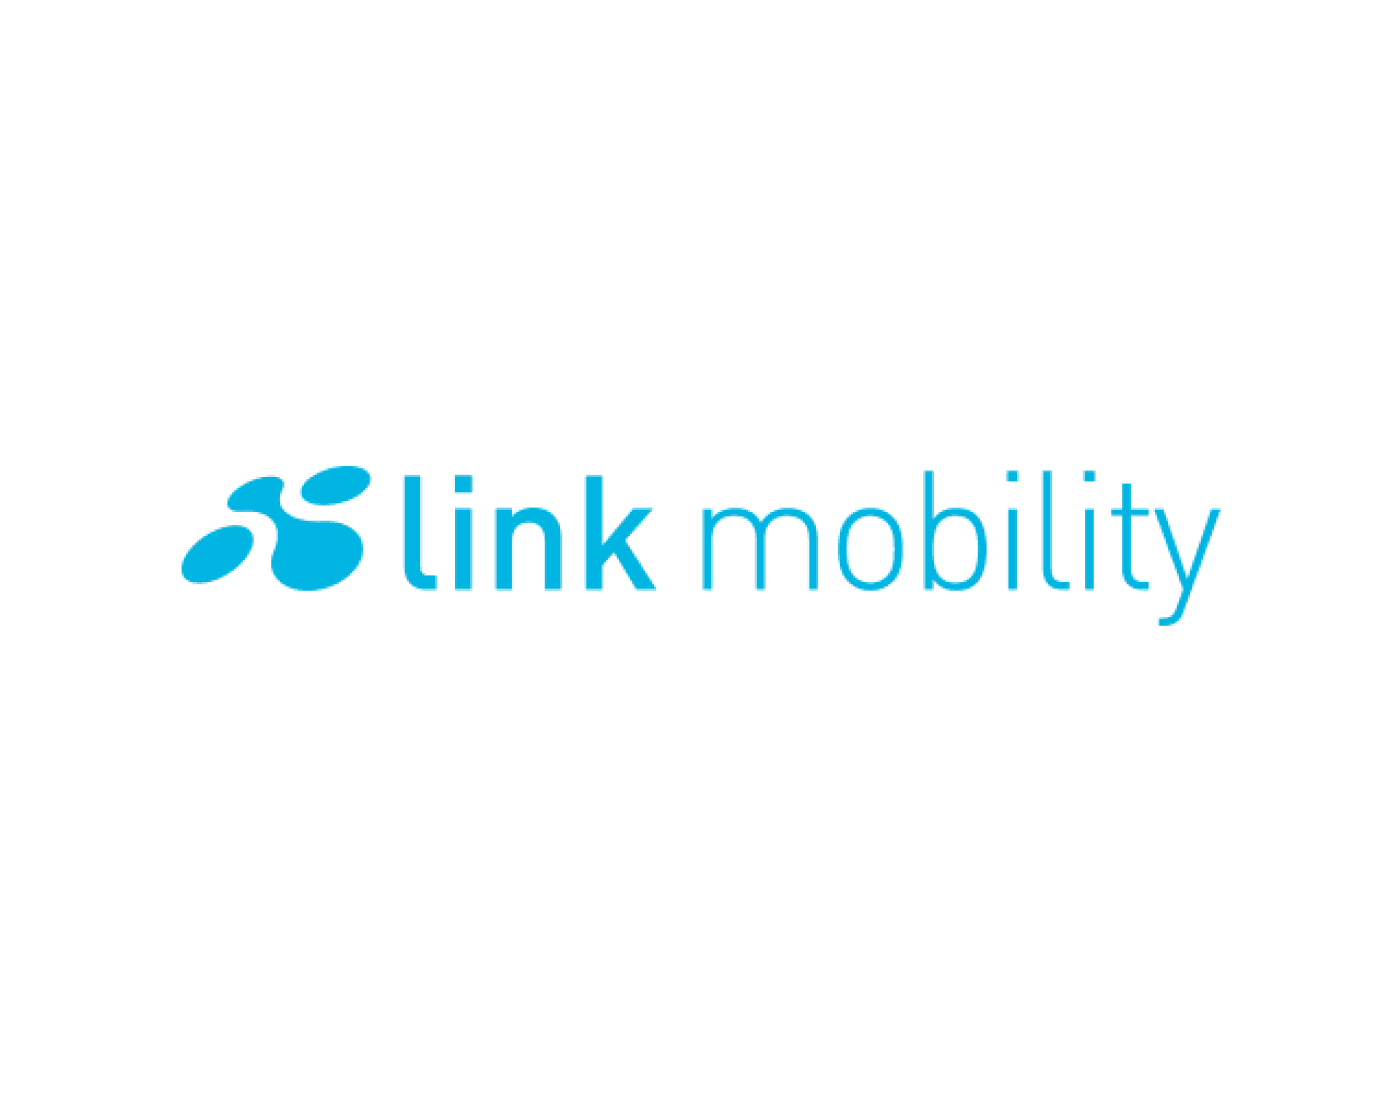 linkmobility-640x500-ny.png